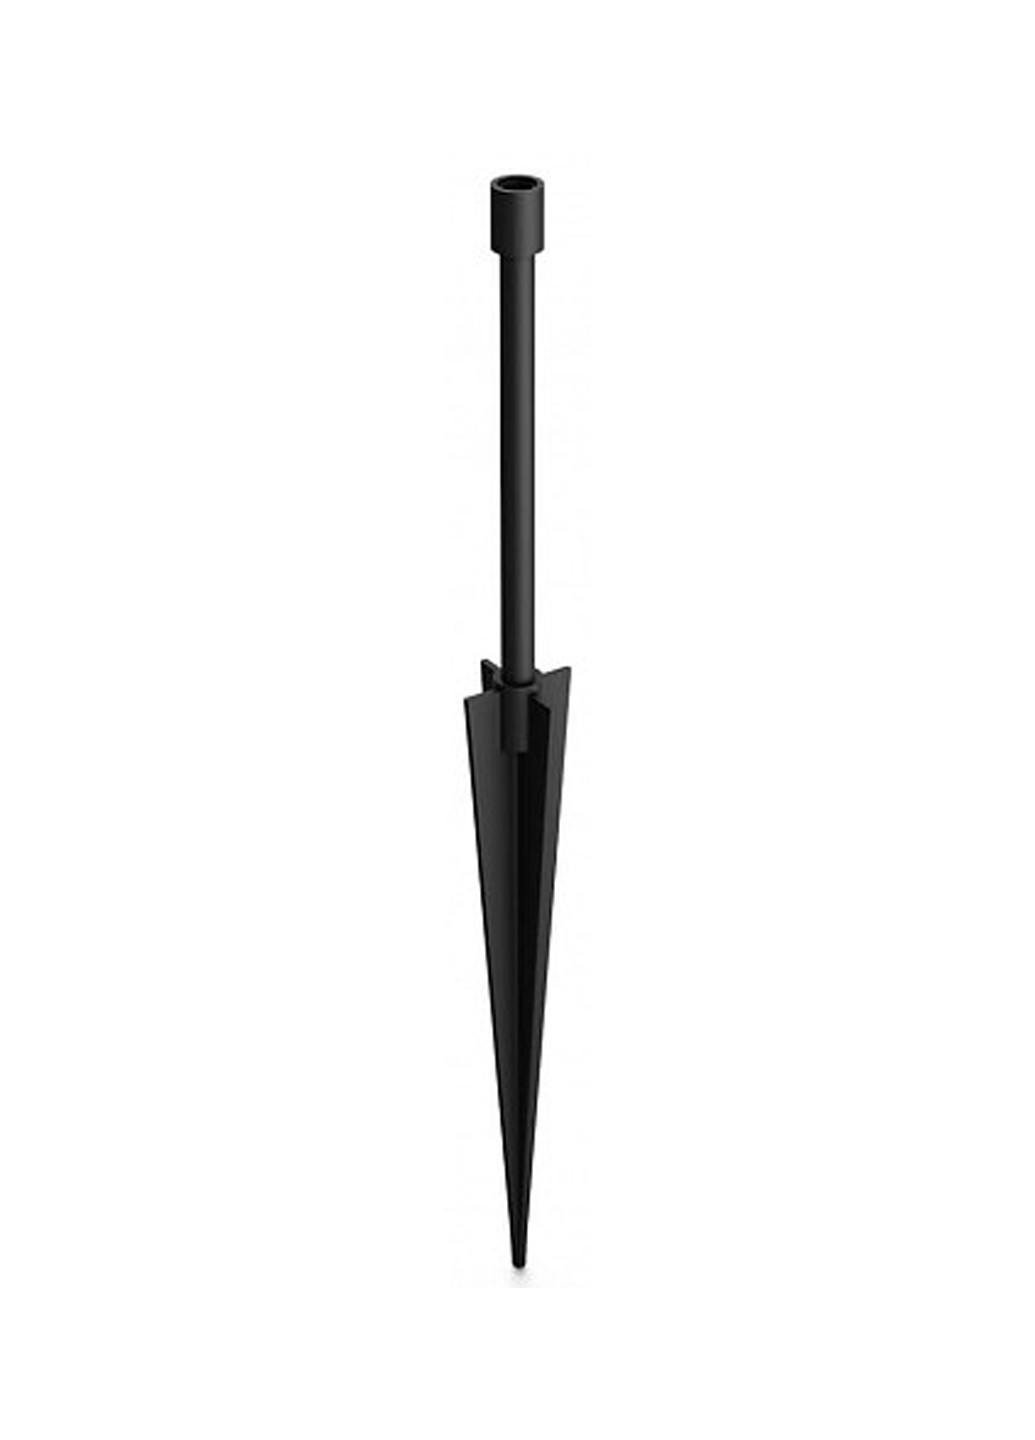 Смарт-светильник Lily spike black 1x8W SELV ext. (17415/30/P7) Philips смарт lily spike black 1x8w selv ext. (17415/30/p7) (142289823)